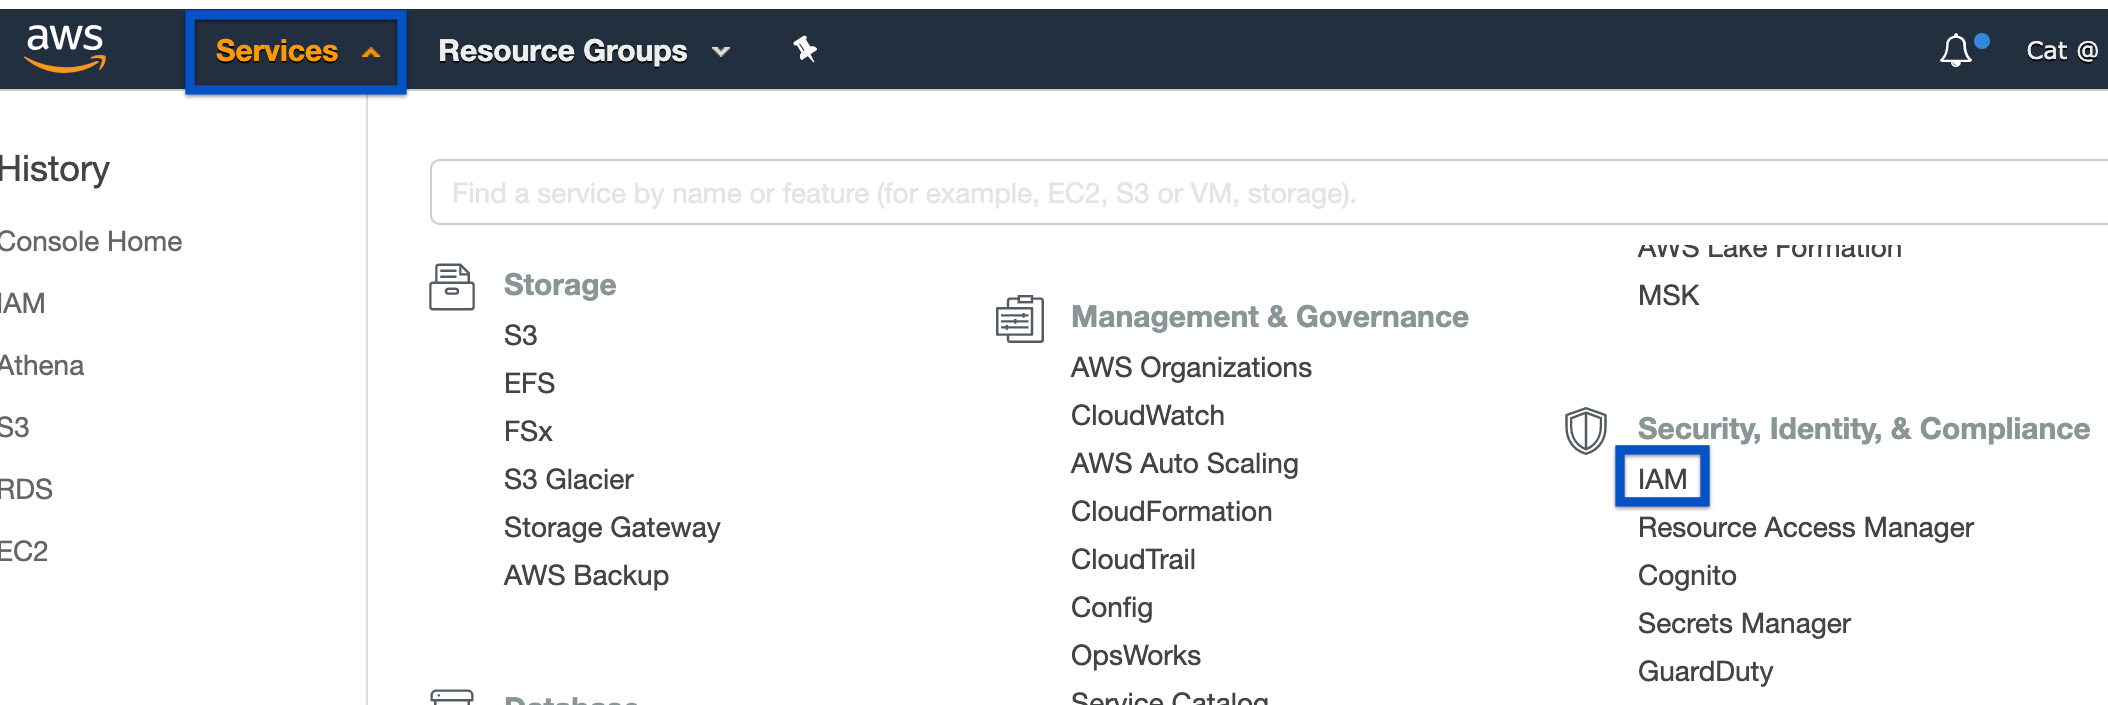 Services > IAM from the top nav bar of the AWS Management Console